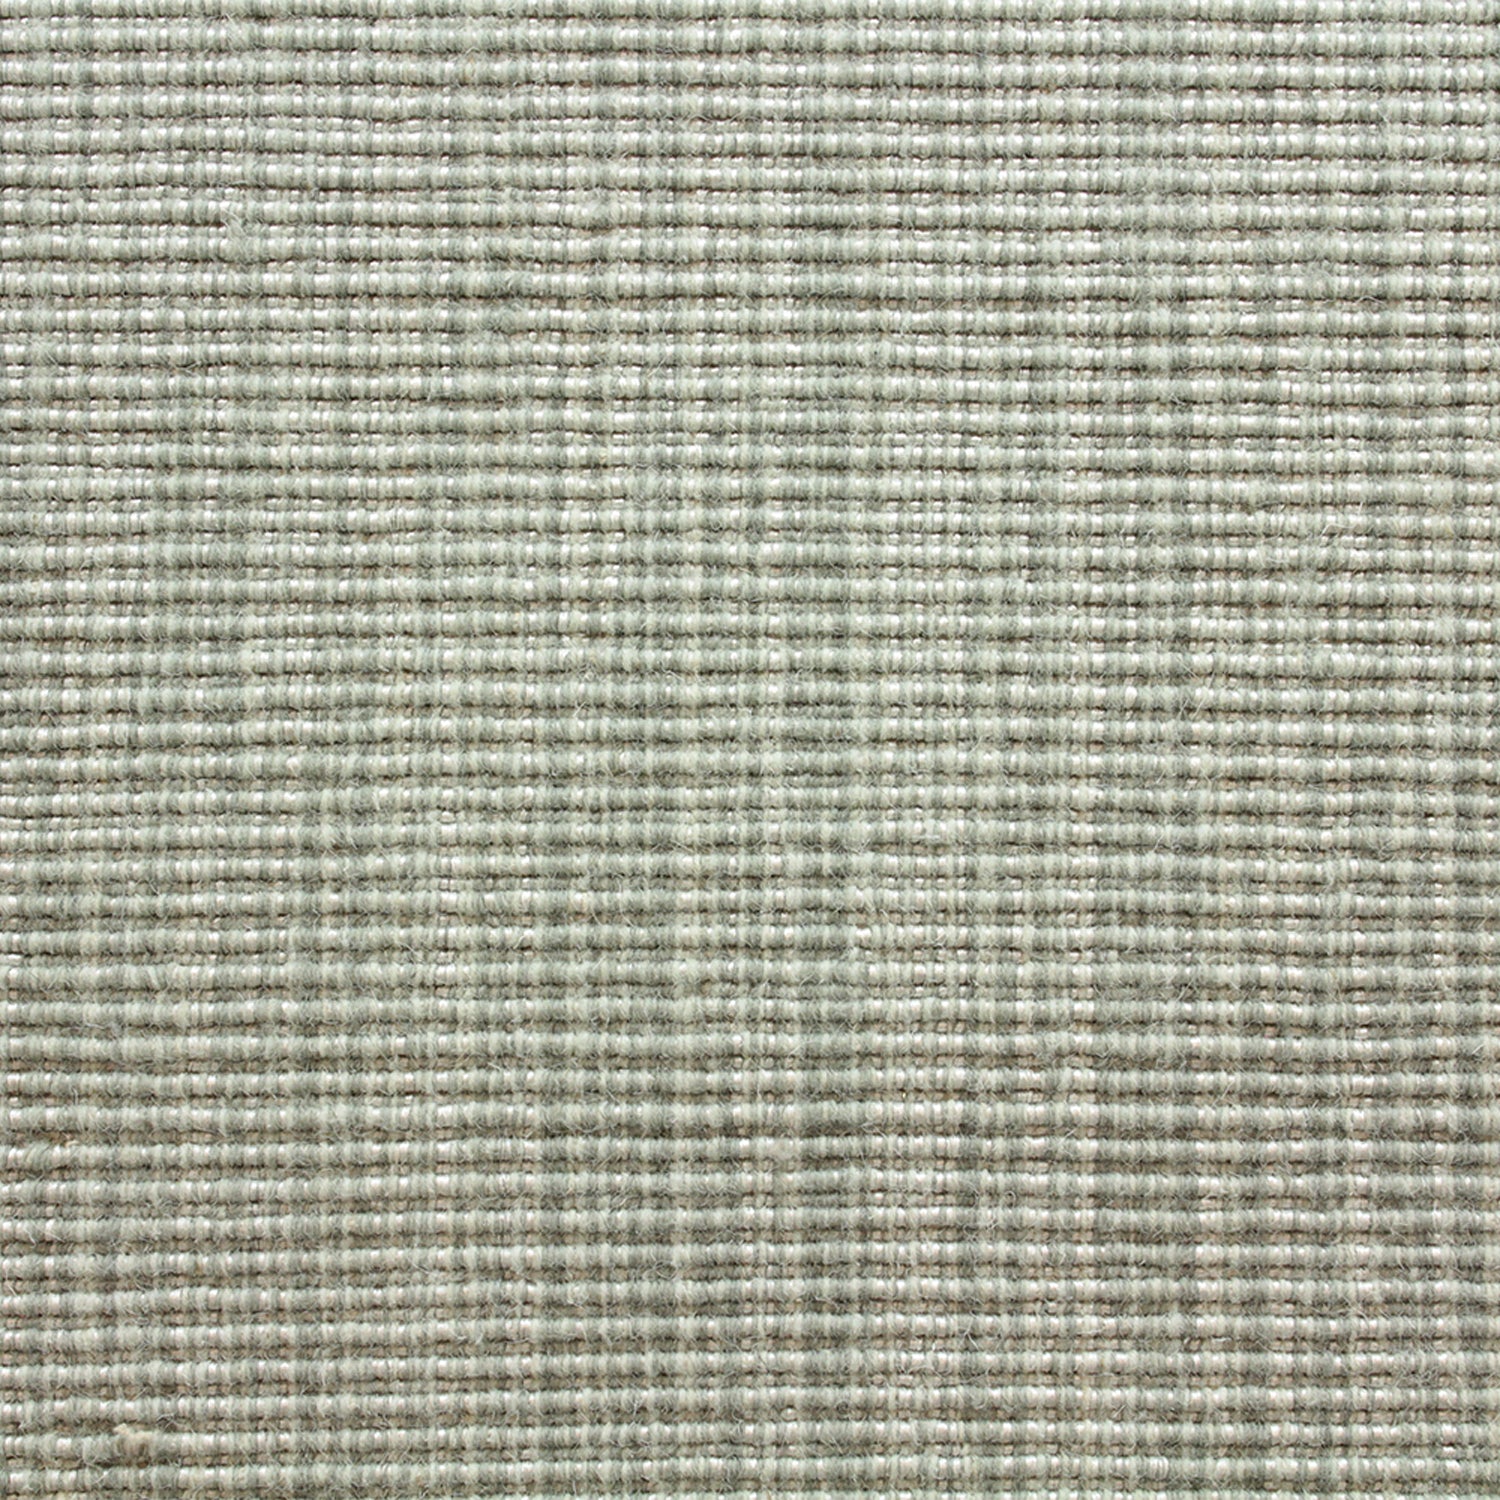 Wool-blend broadloom carpet swatch in a ribbed weave in mottled mint green and cream.